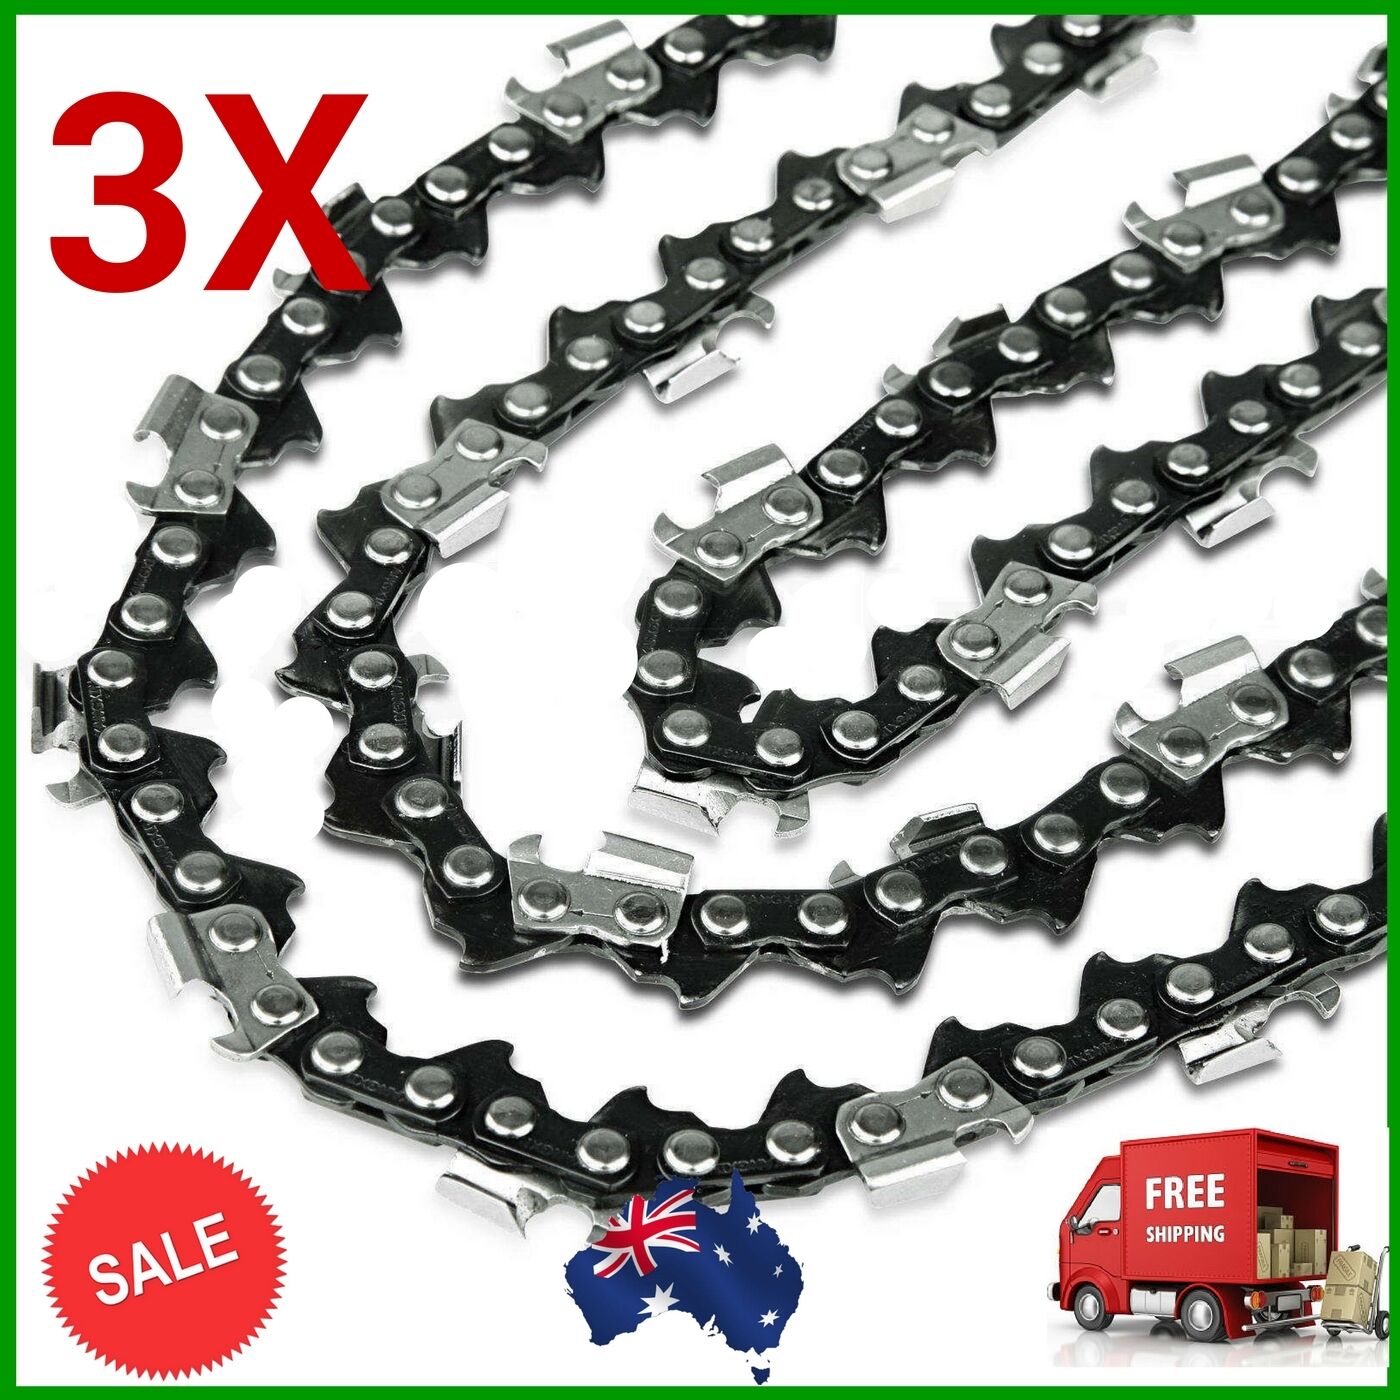 12" BAR & 3 CHAIN For TOOLSTORM 4-STROKE Brush Cutter Chainsaw Trimmer Backpack